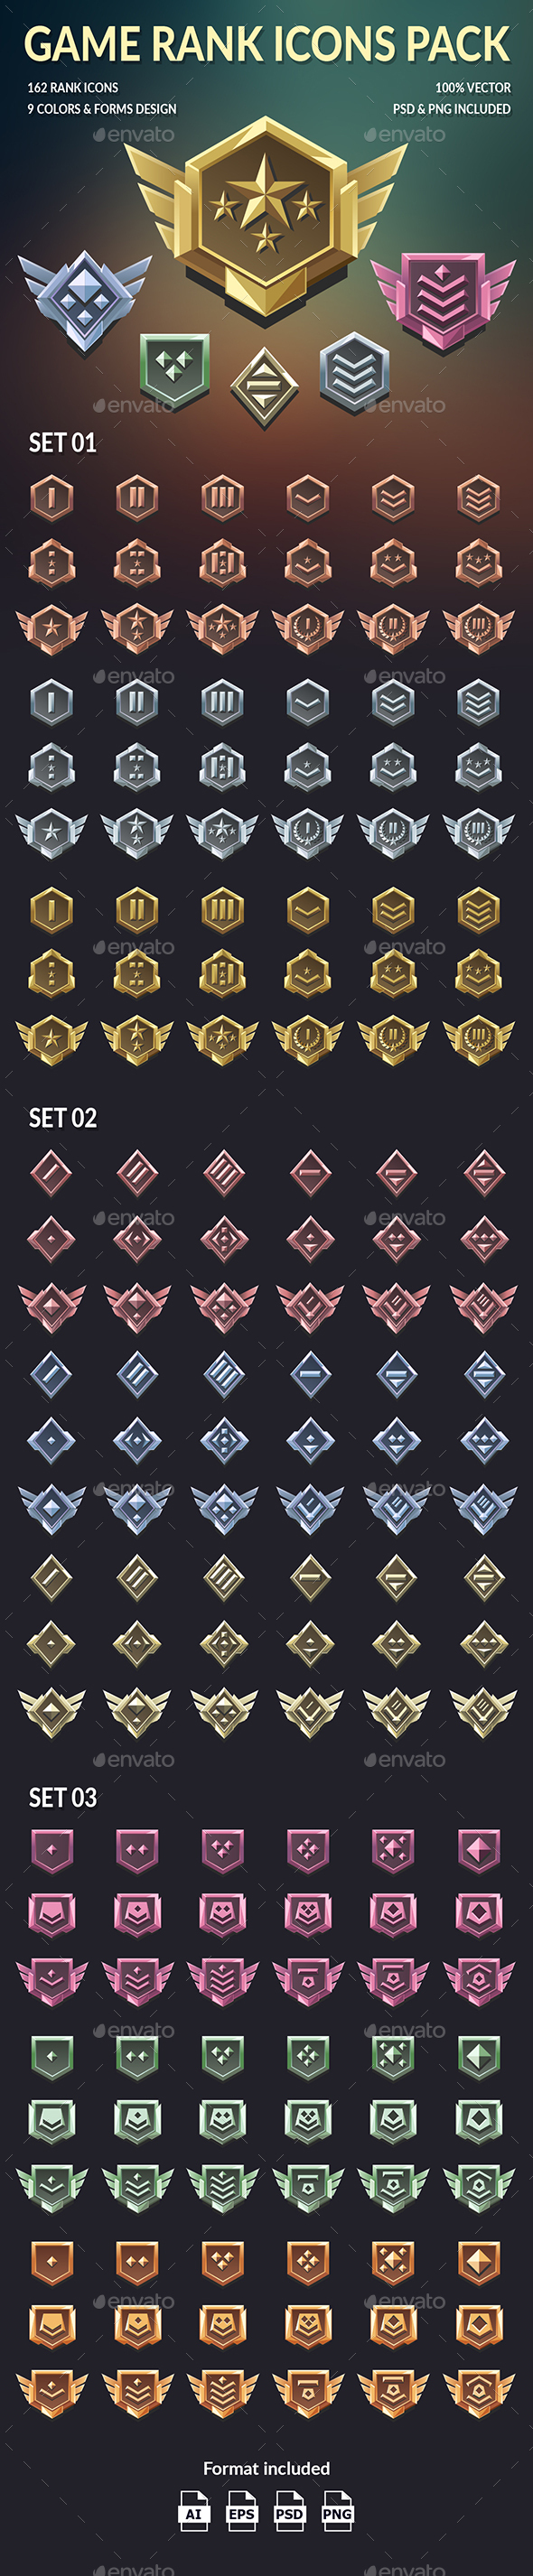 Game Rank Icons Pack